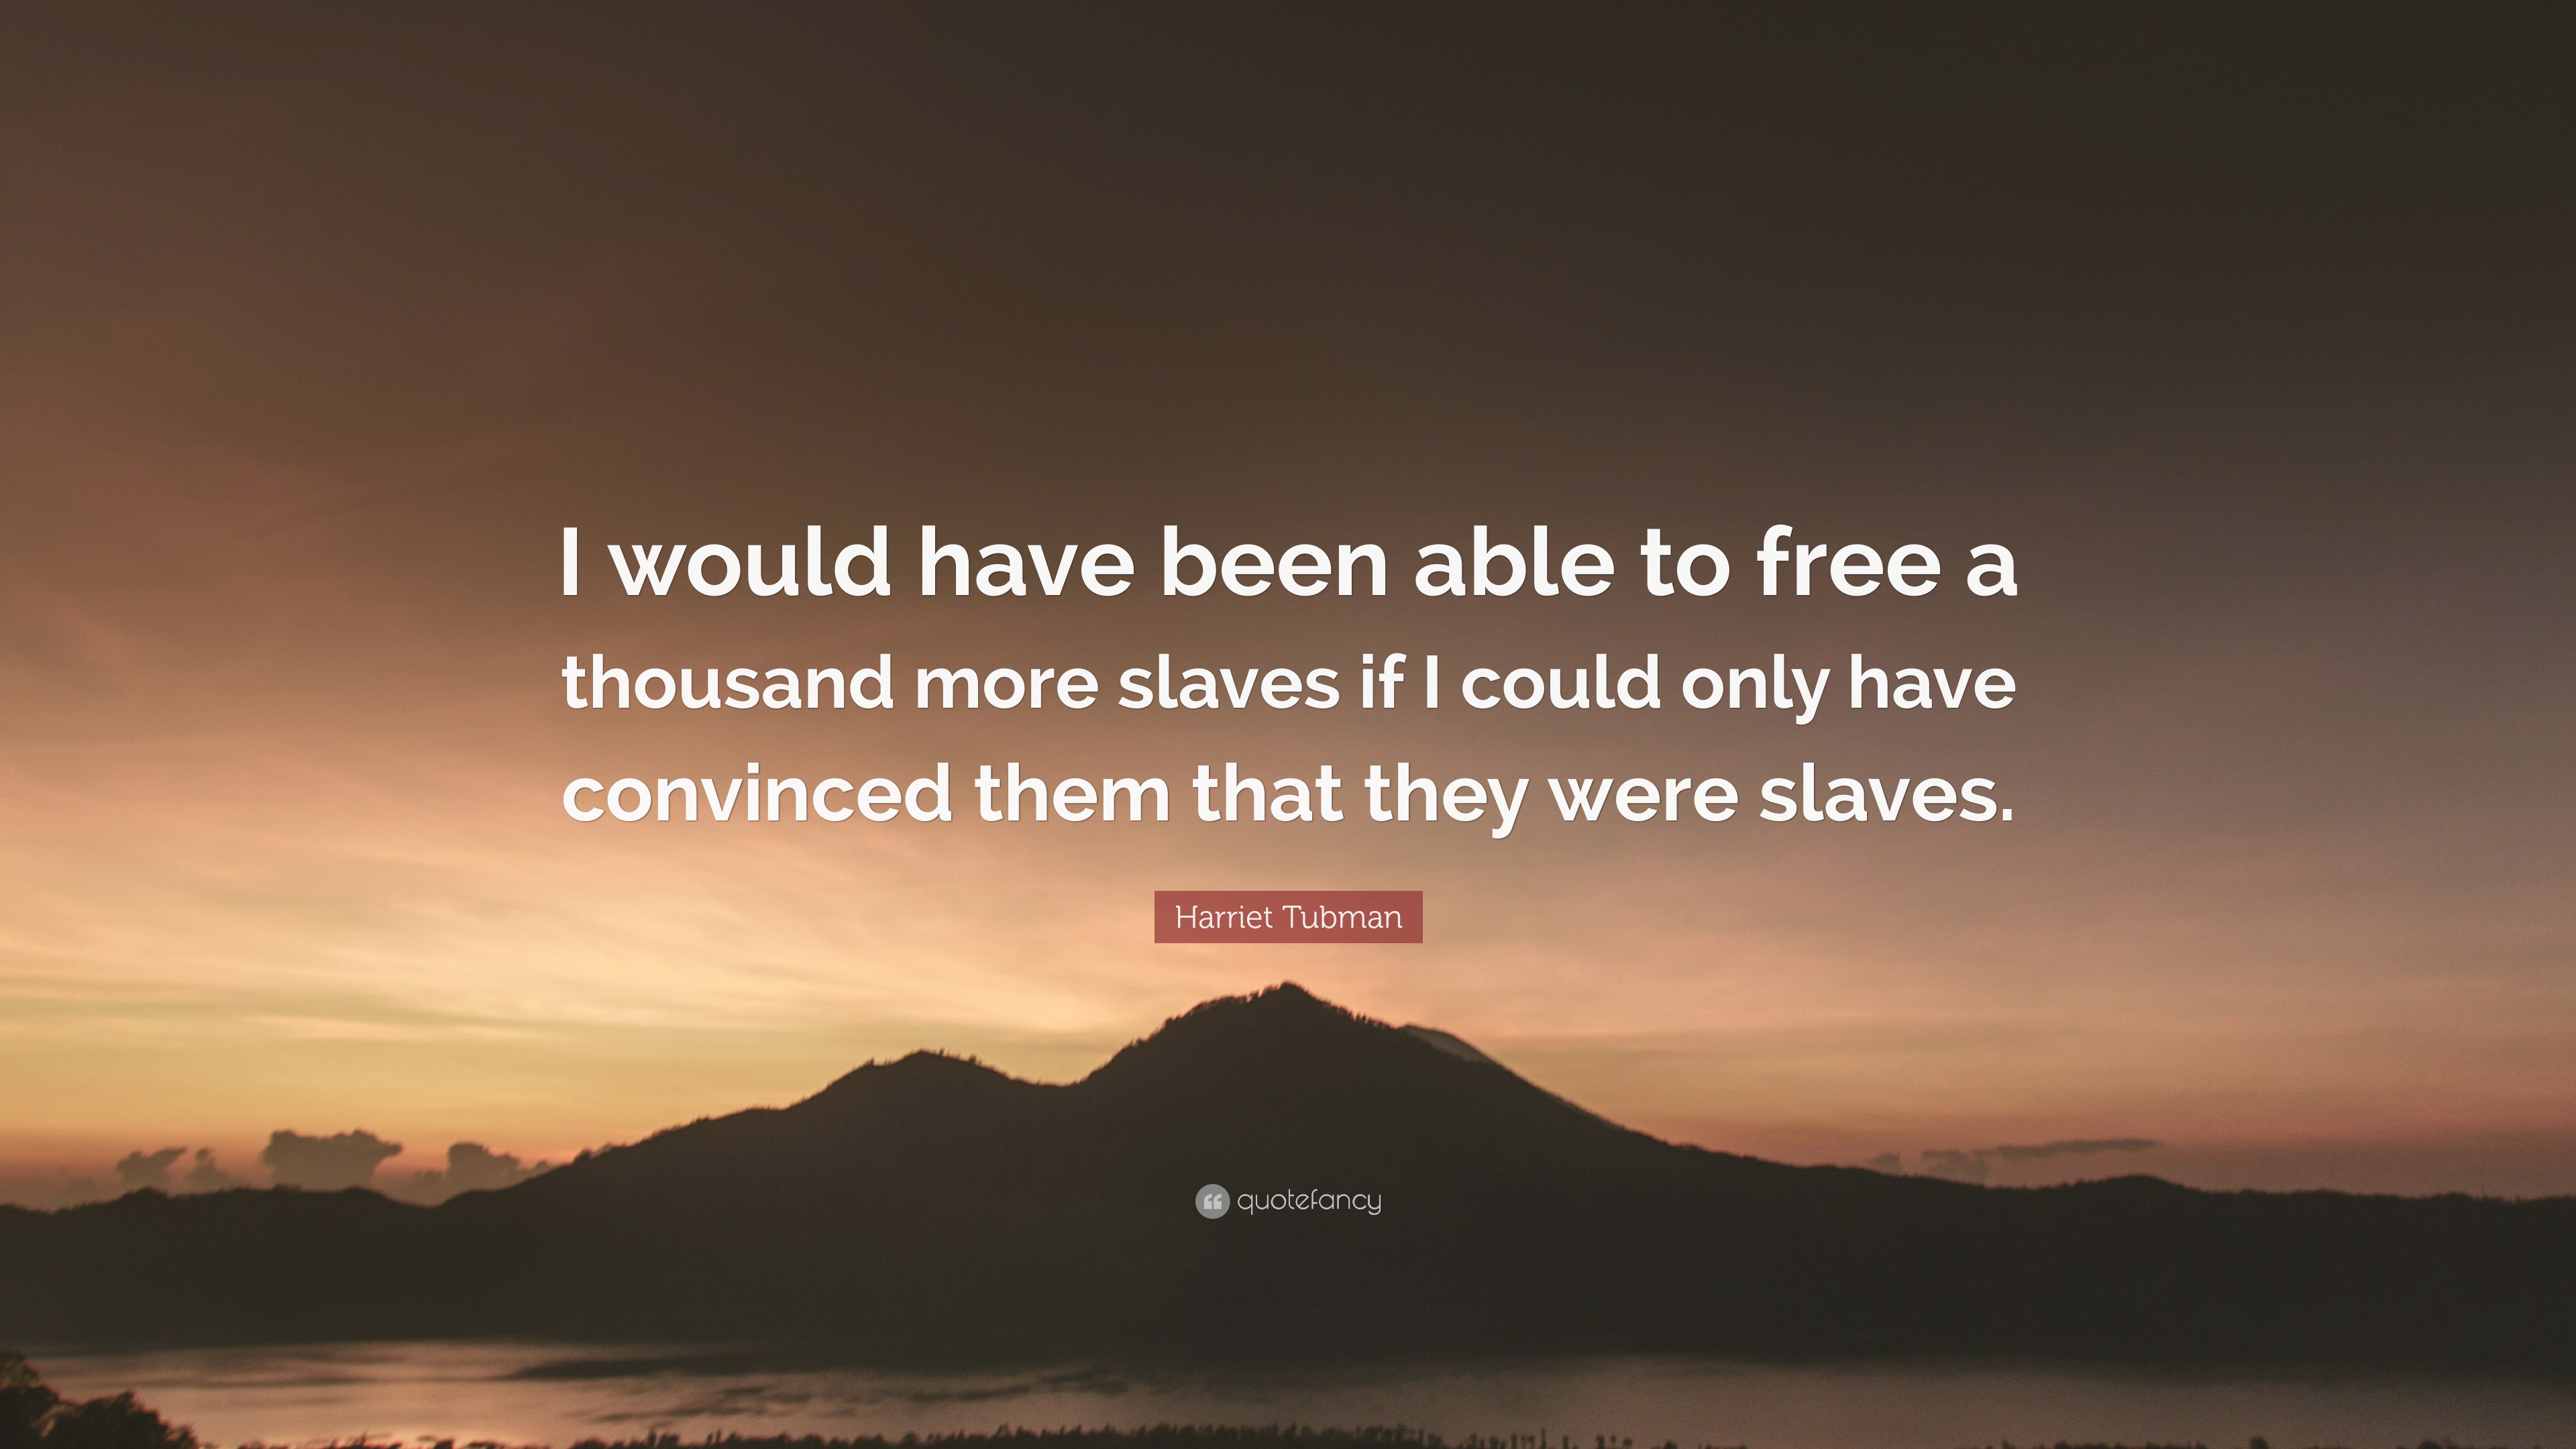 Harriet Tubman Quote I Would Have Been Able To Free A Thousand More Slaves If I Could Only Have Convinced Them That They Were Slaves 7 Wallpapers Quotefancy